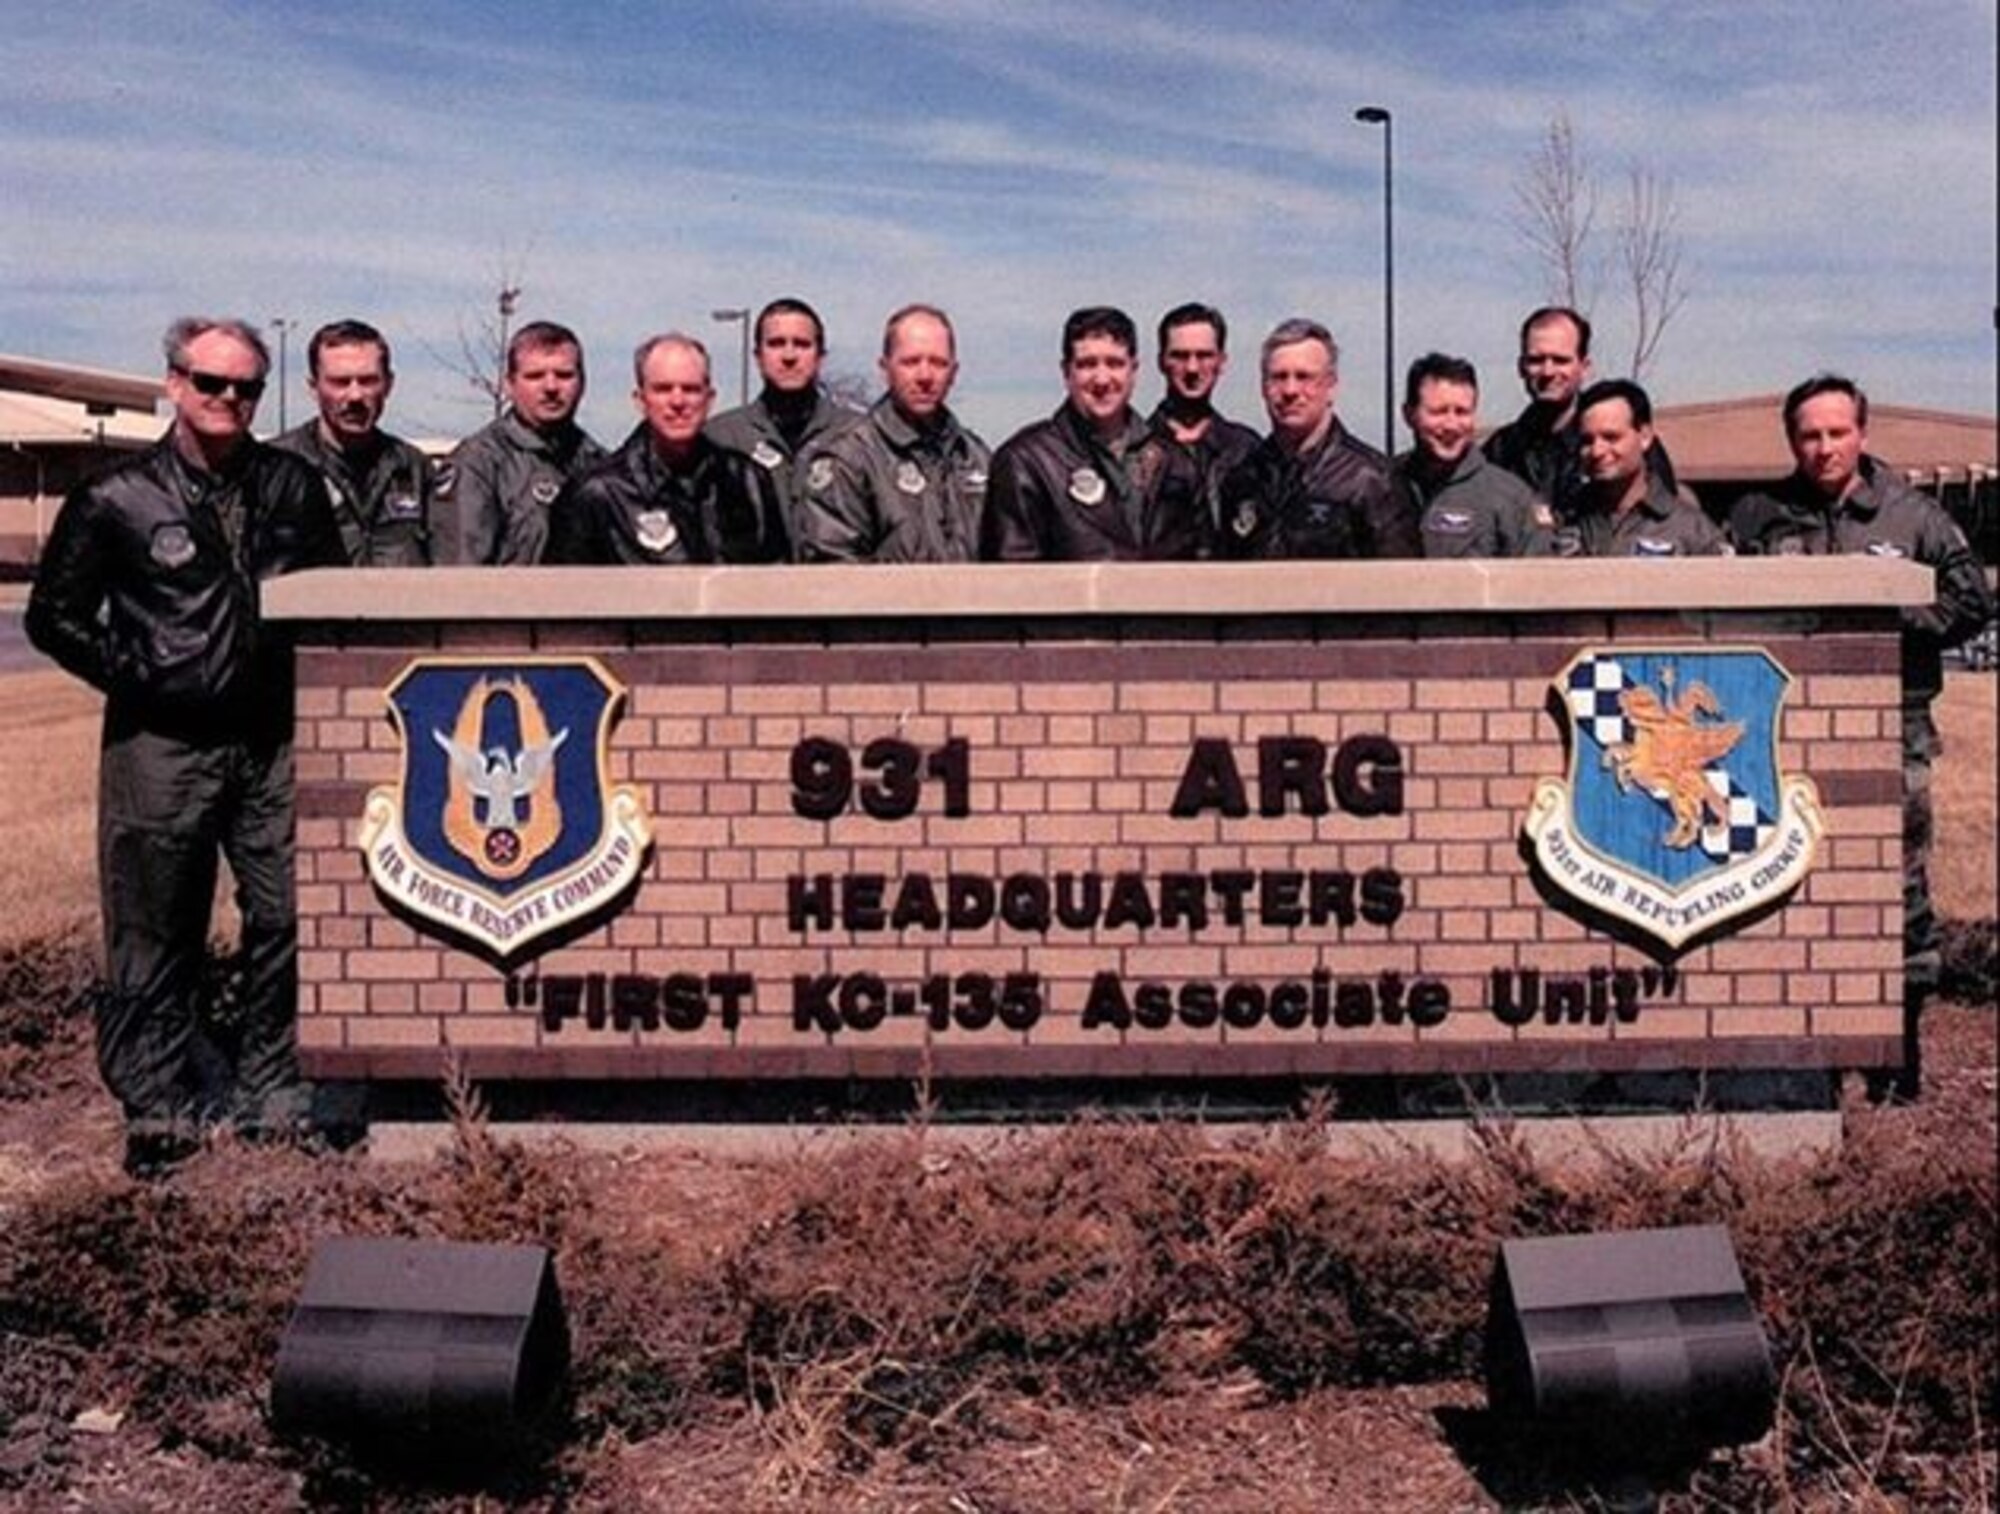 In an undated photo, the original 931st Air Refueling Group KC-135 Stratotanker navigators pose for a photo at McConnell Air Force Base, Kan. The 931st Air Refueling Wing, then a Group, stood up at McConnell Jan 1., 1995.  Members have traveled all over the world and been a major force in defending the United States.